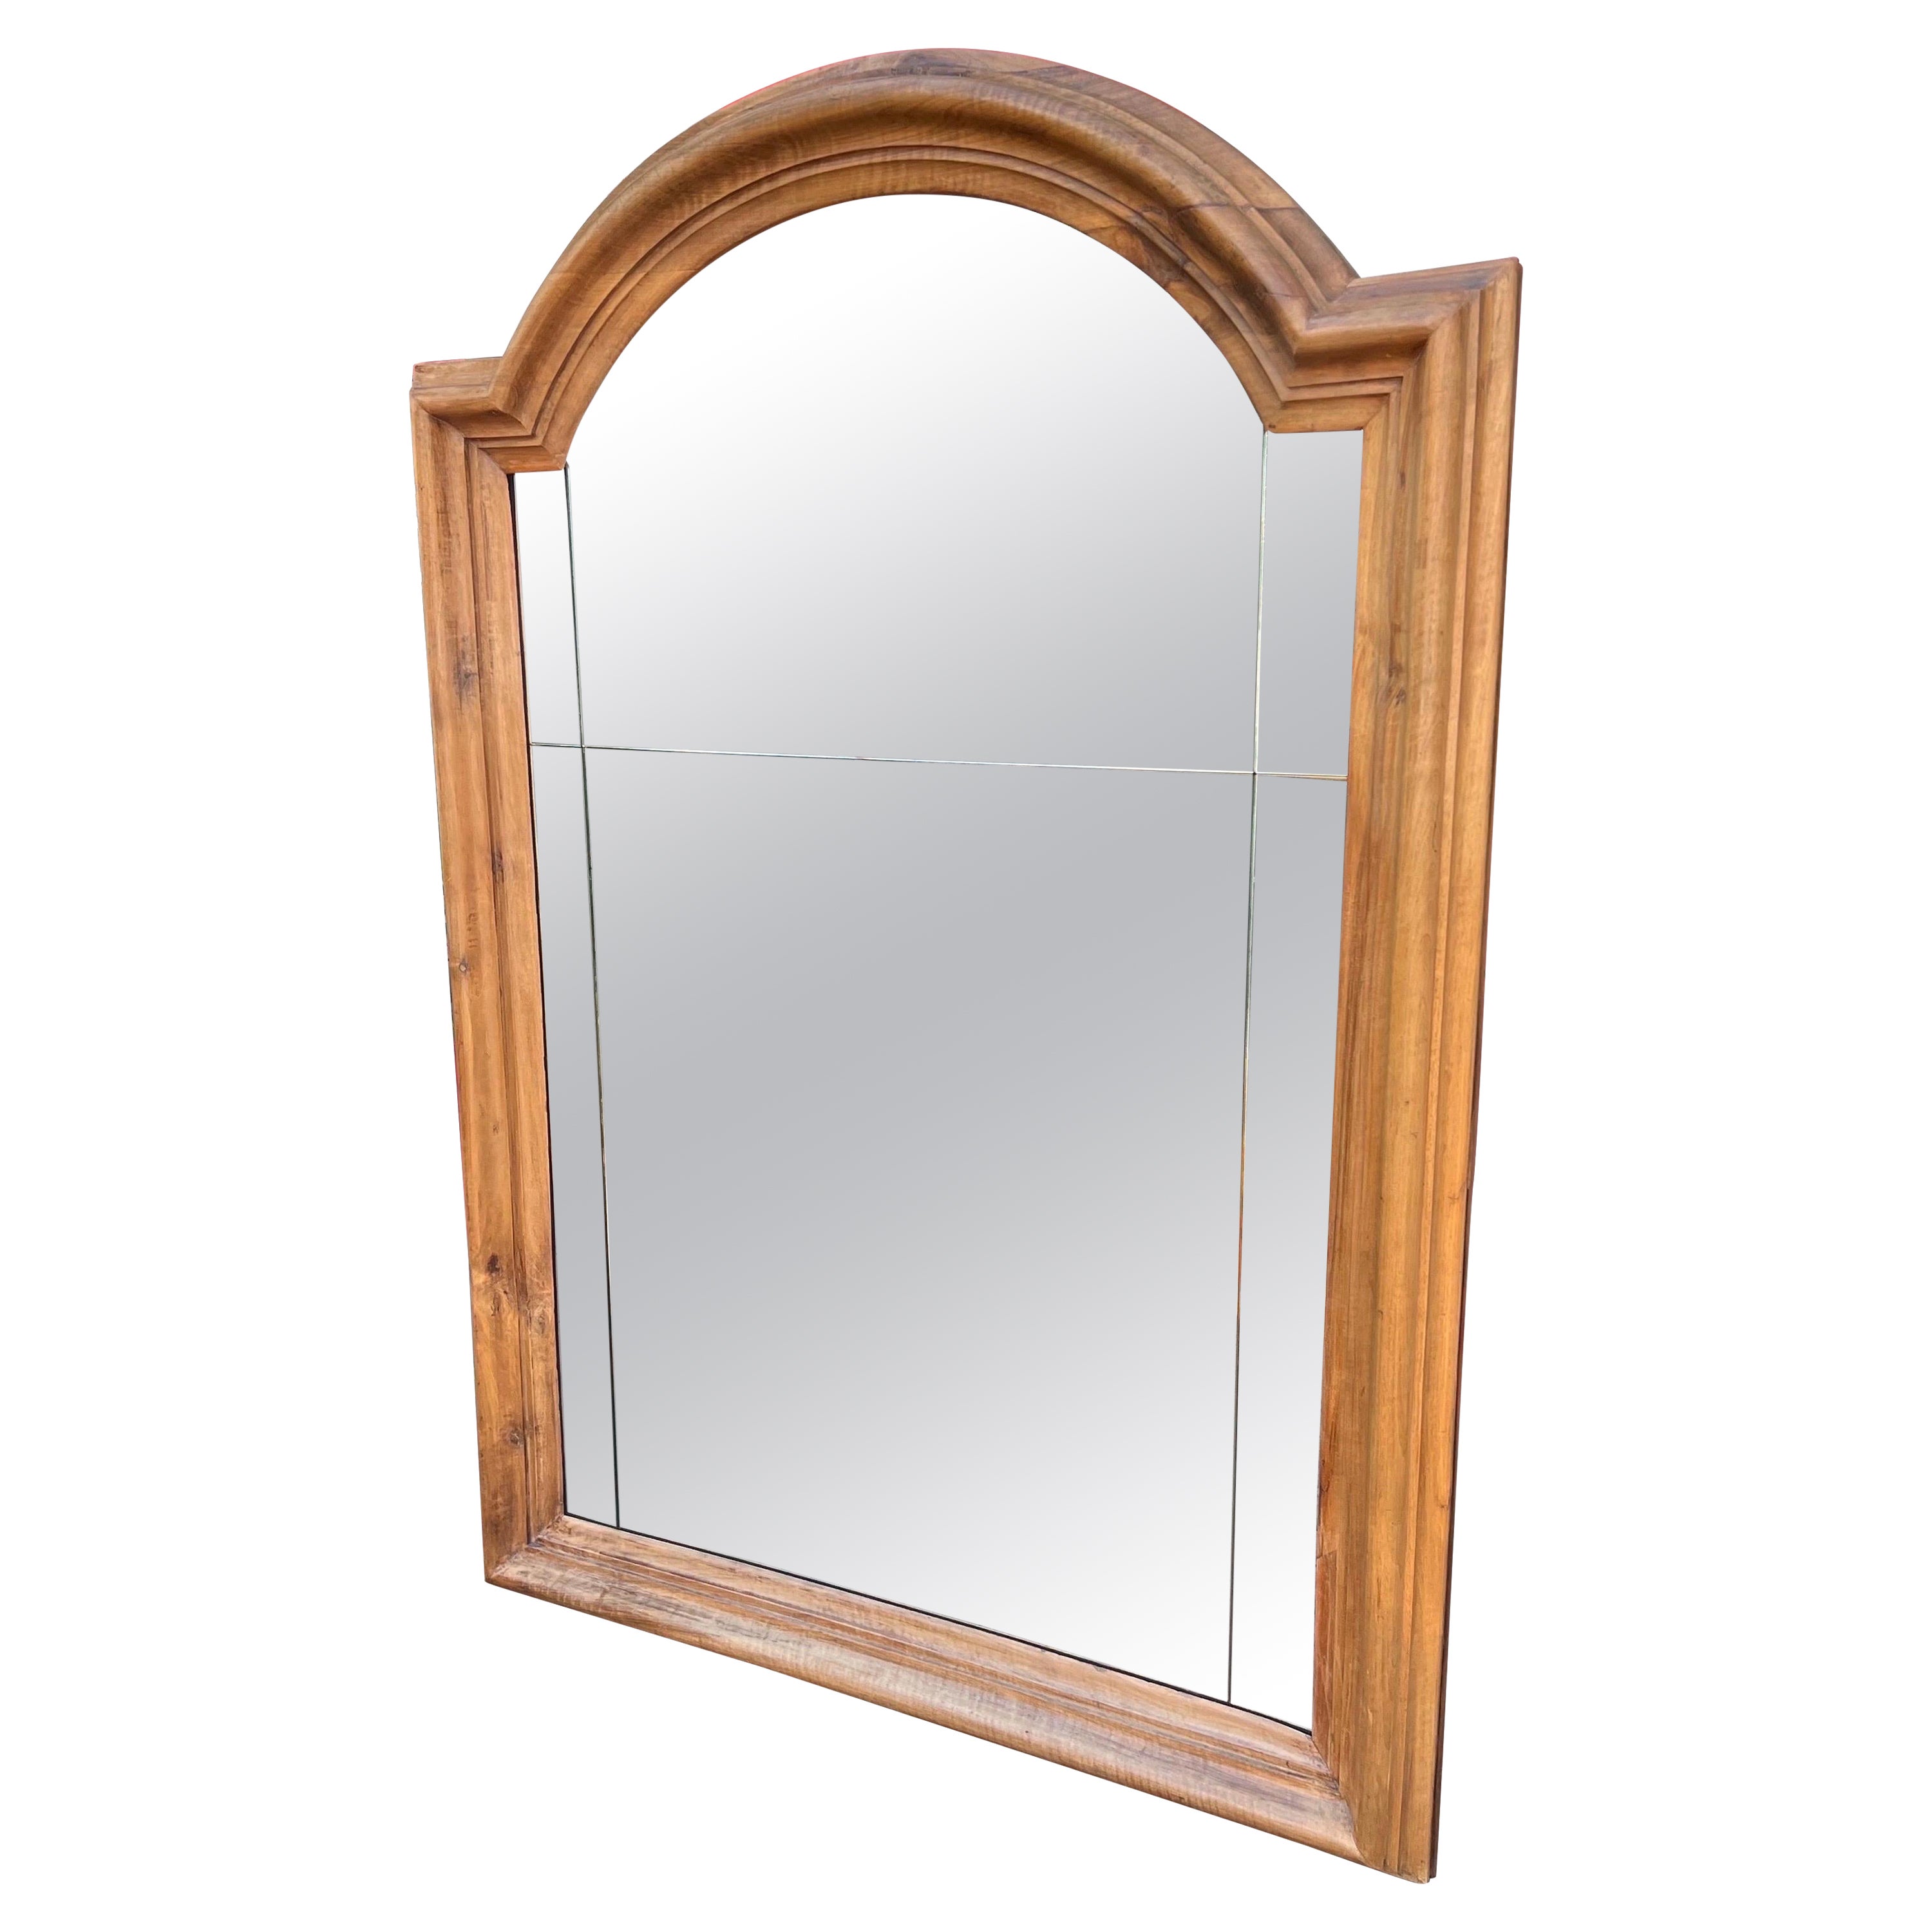 7’4” Tall 19th Century Continental Pine Mirror For Sale